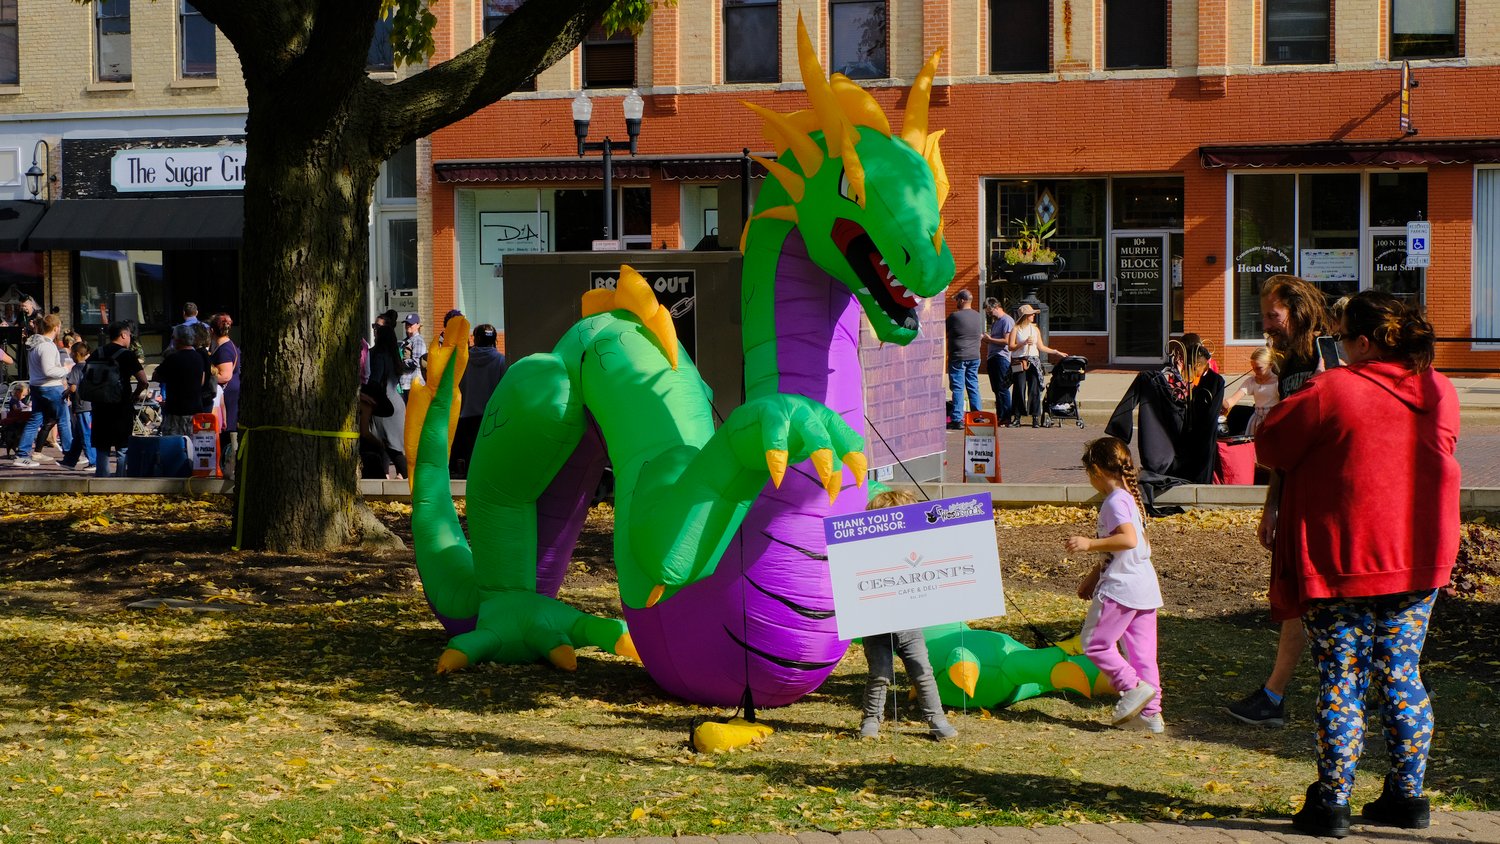 Kids with giant inflatable dragon.